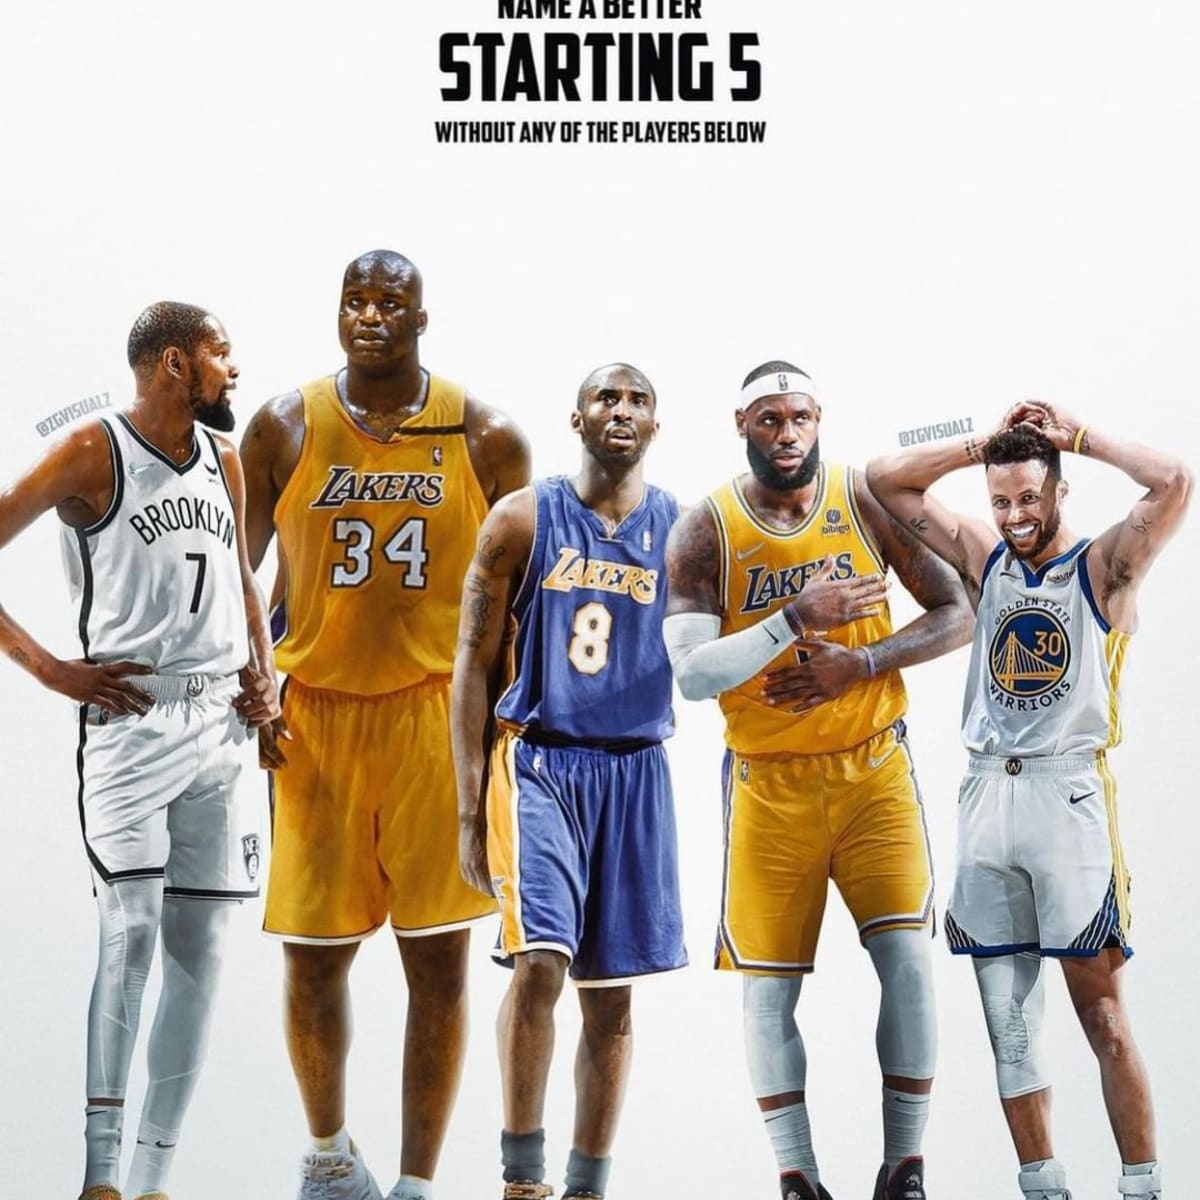 NBA Fans Try To Name A Better Starting 5 Without Any Of The Players From  The List: Stephen Curry, Kobe Bryant, LeBron James, Kevin Durant, Shaquille  O'Neal - Fadeaway World